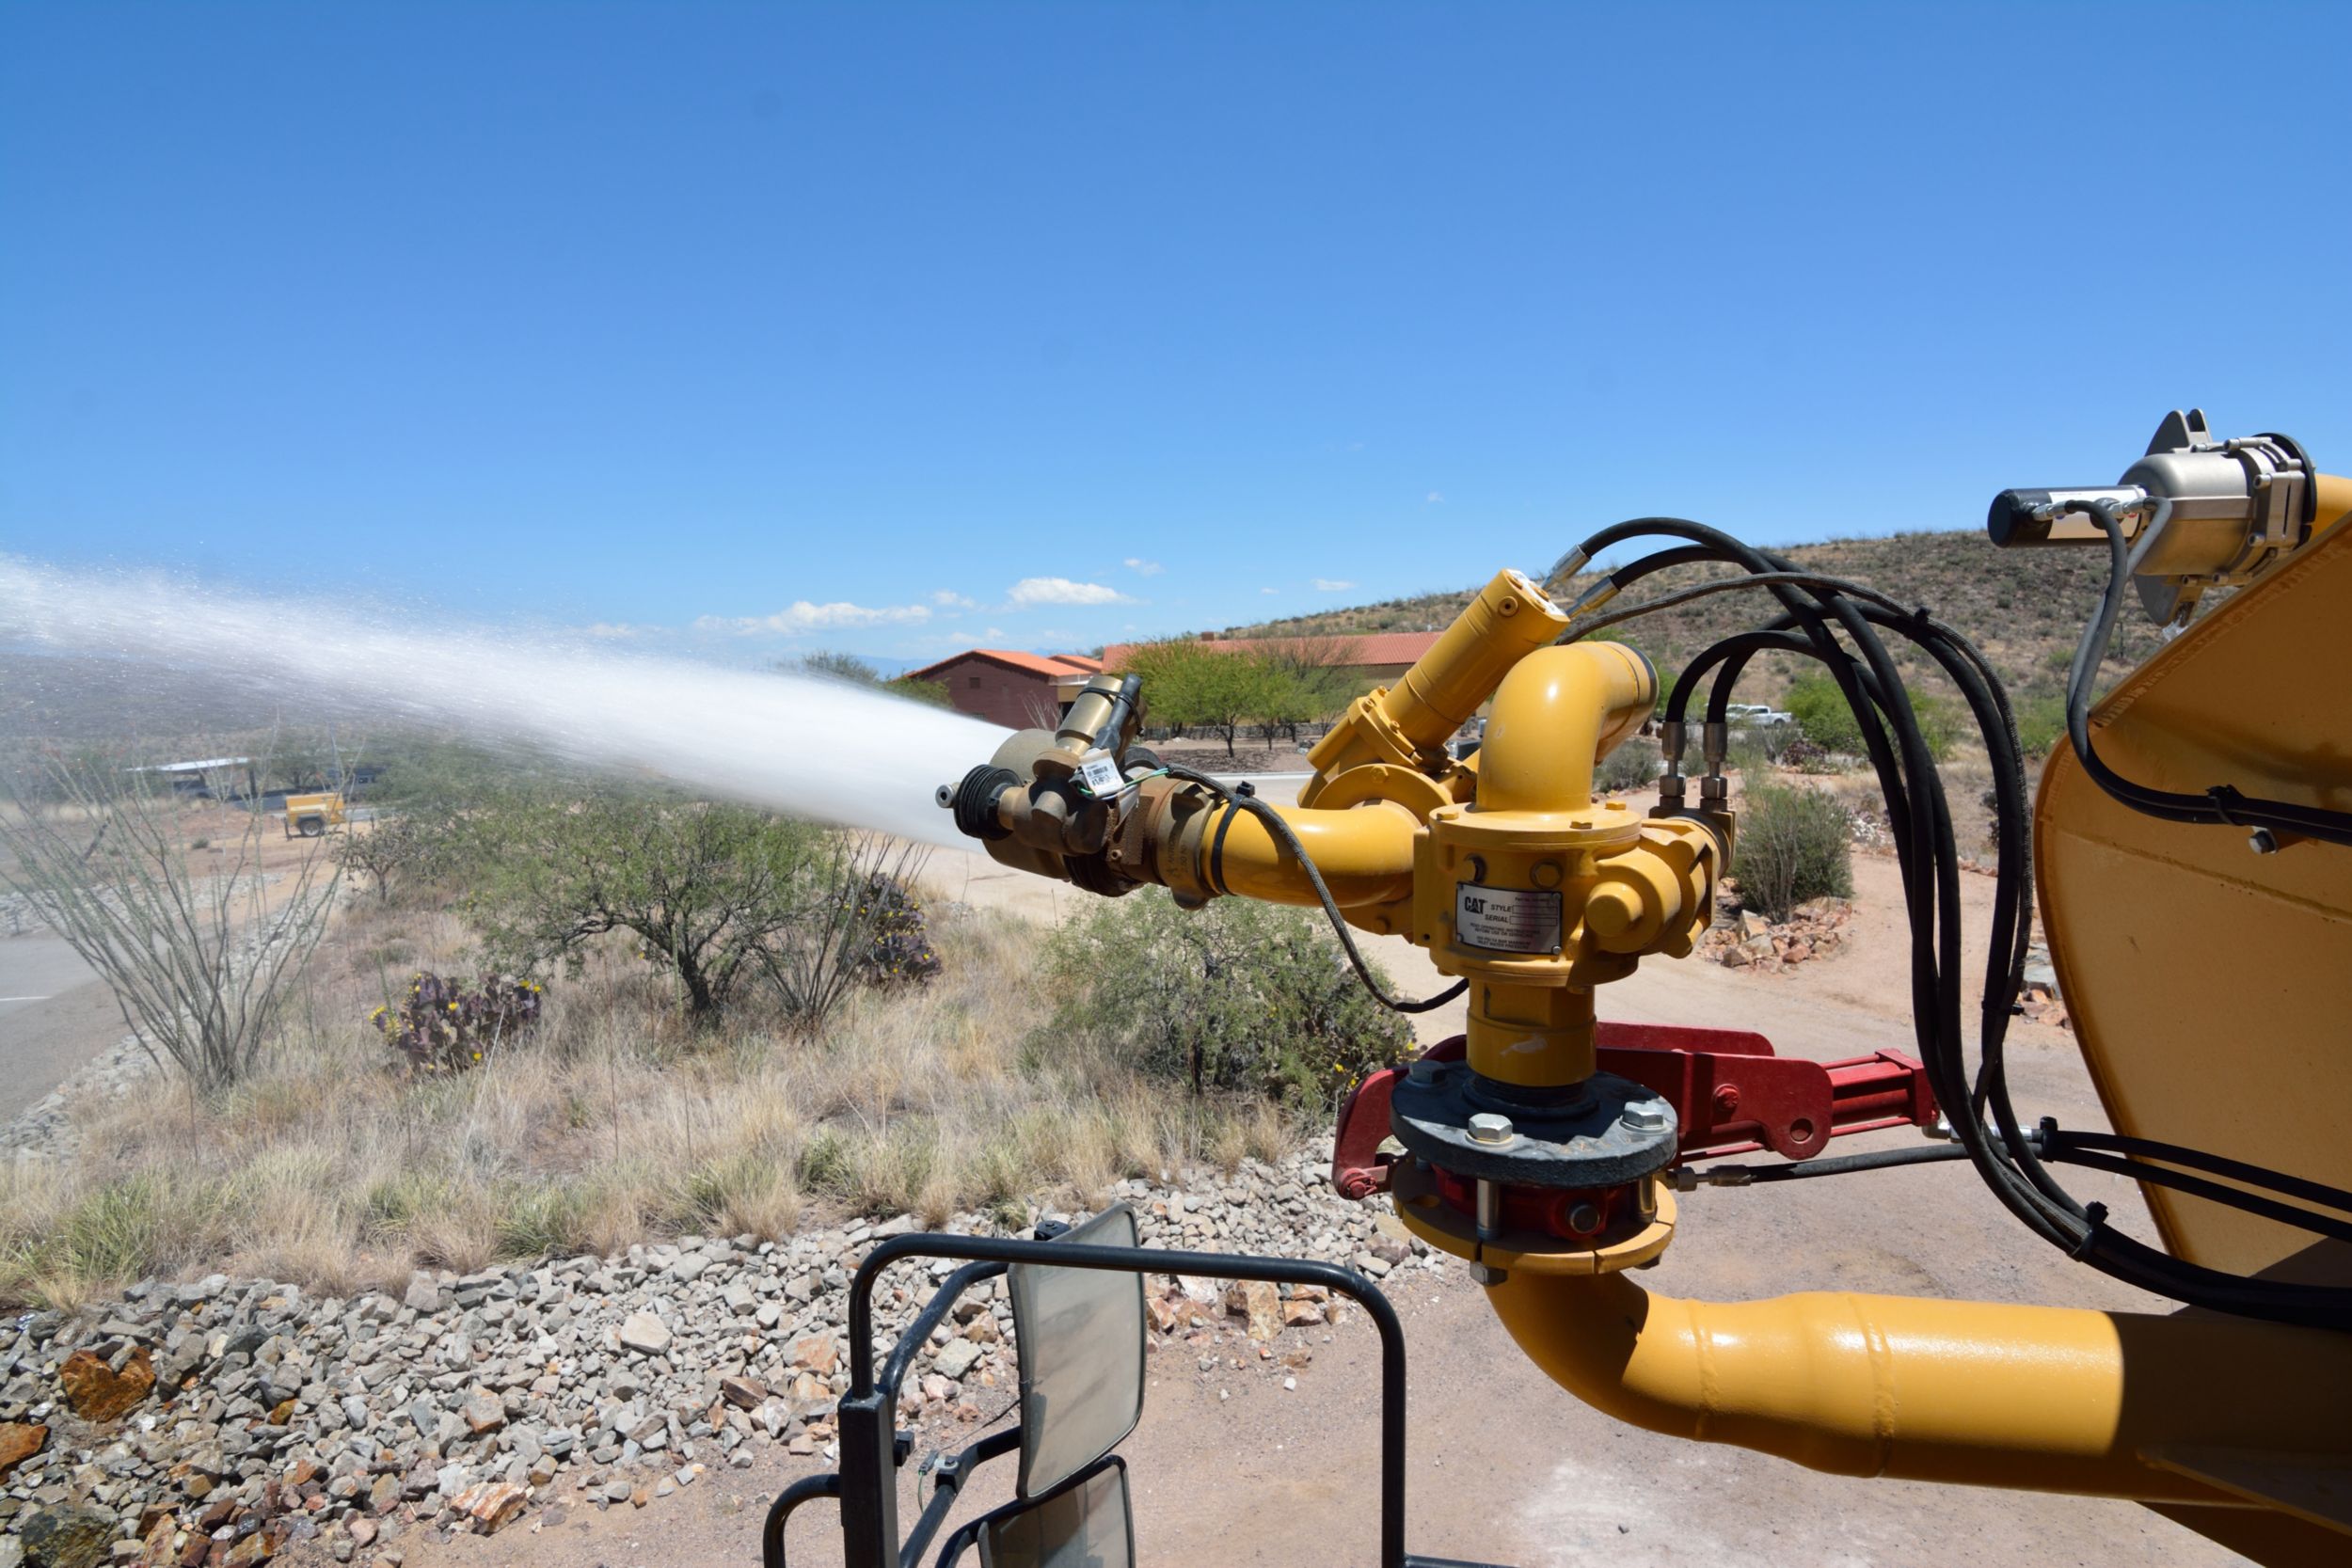 Water Delivery System water cannon on a water truck at the Tuscon Proving Ground (TPG)>